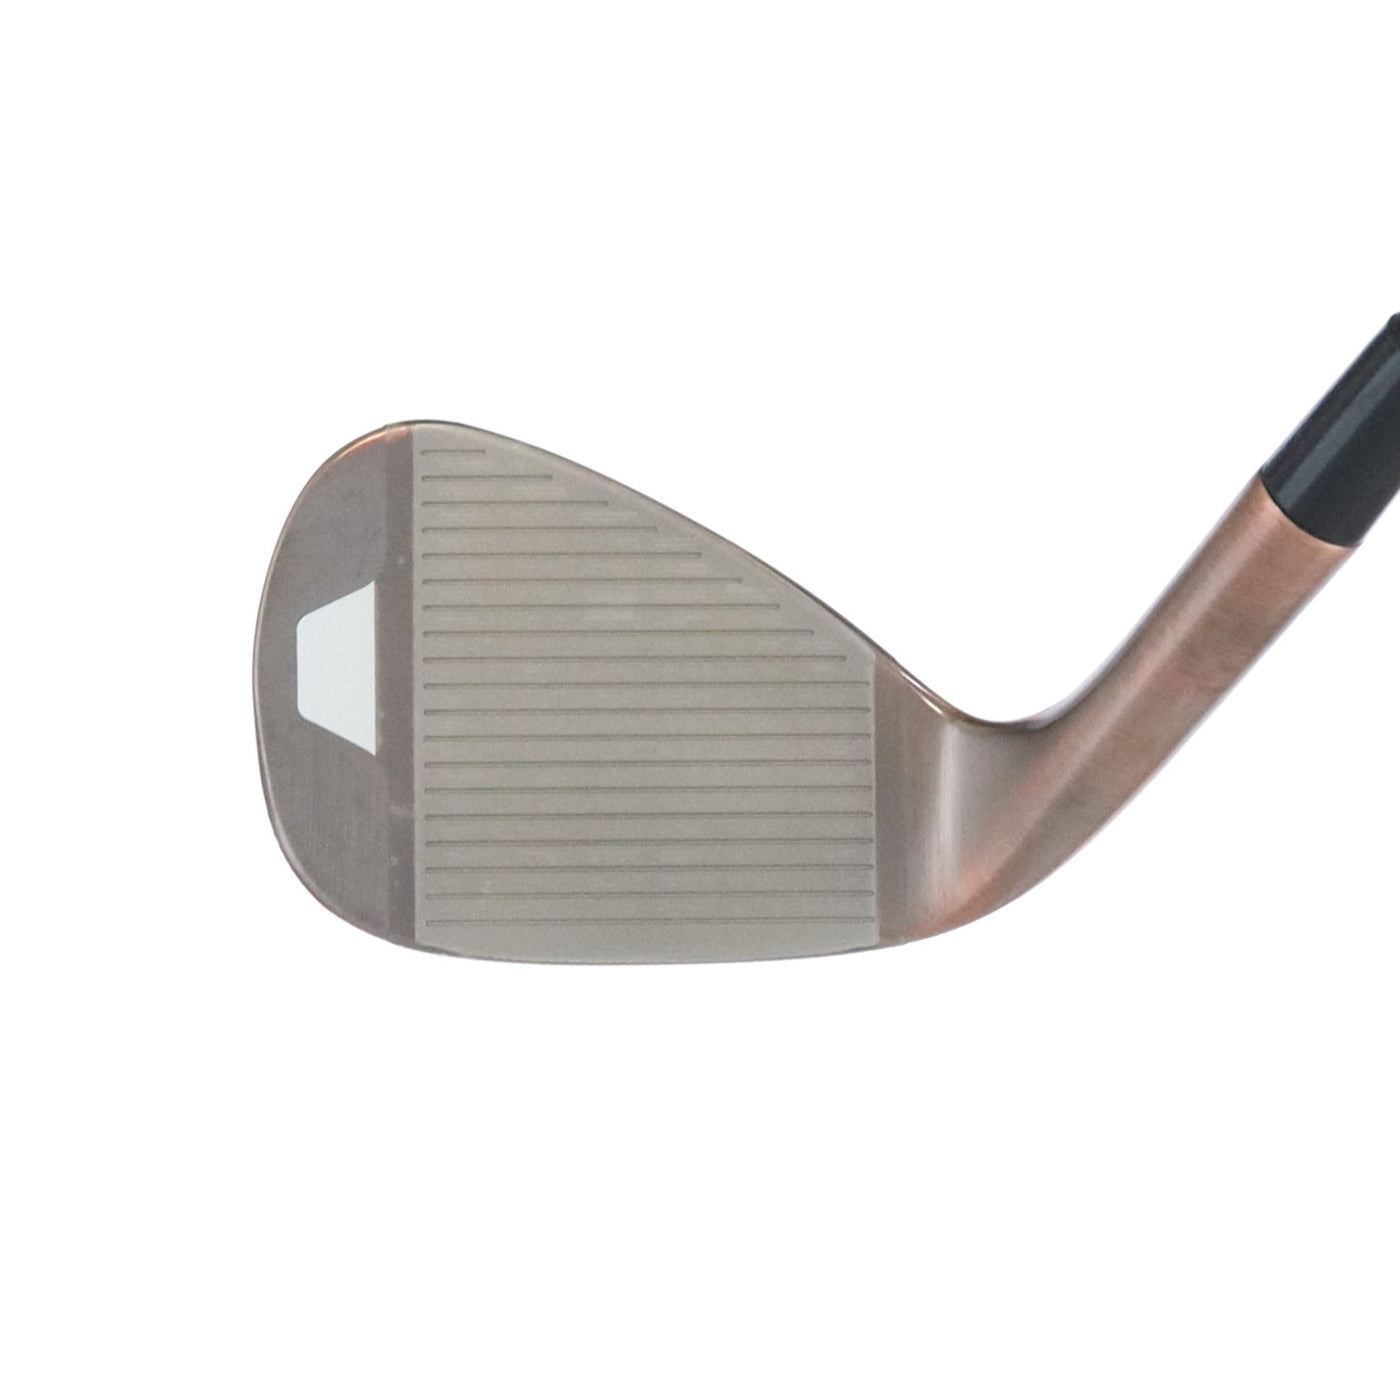 taylormade wedge openbox milled grind hi toe2022 52 dynamic gold s200